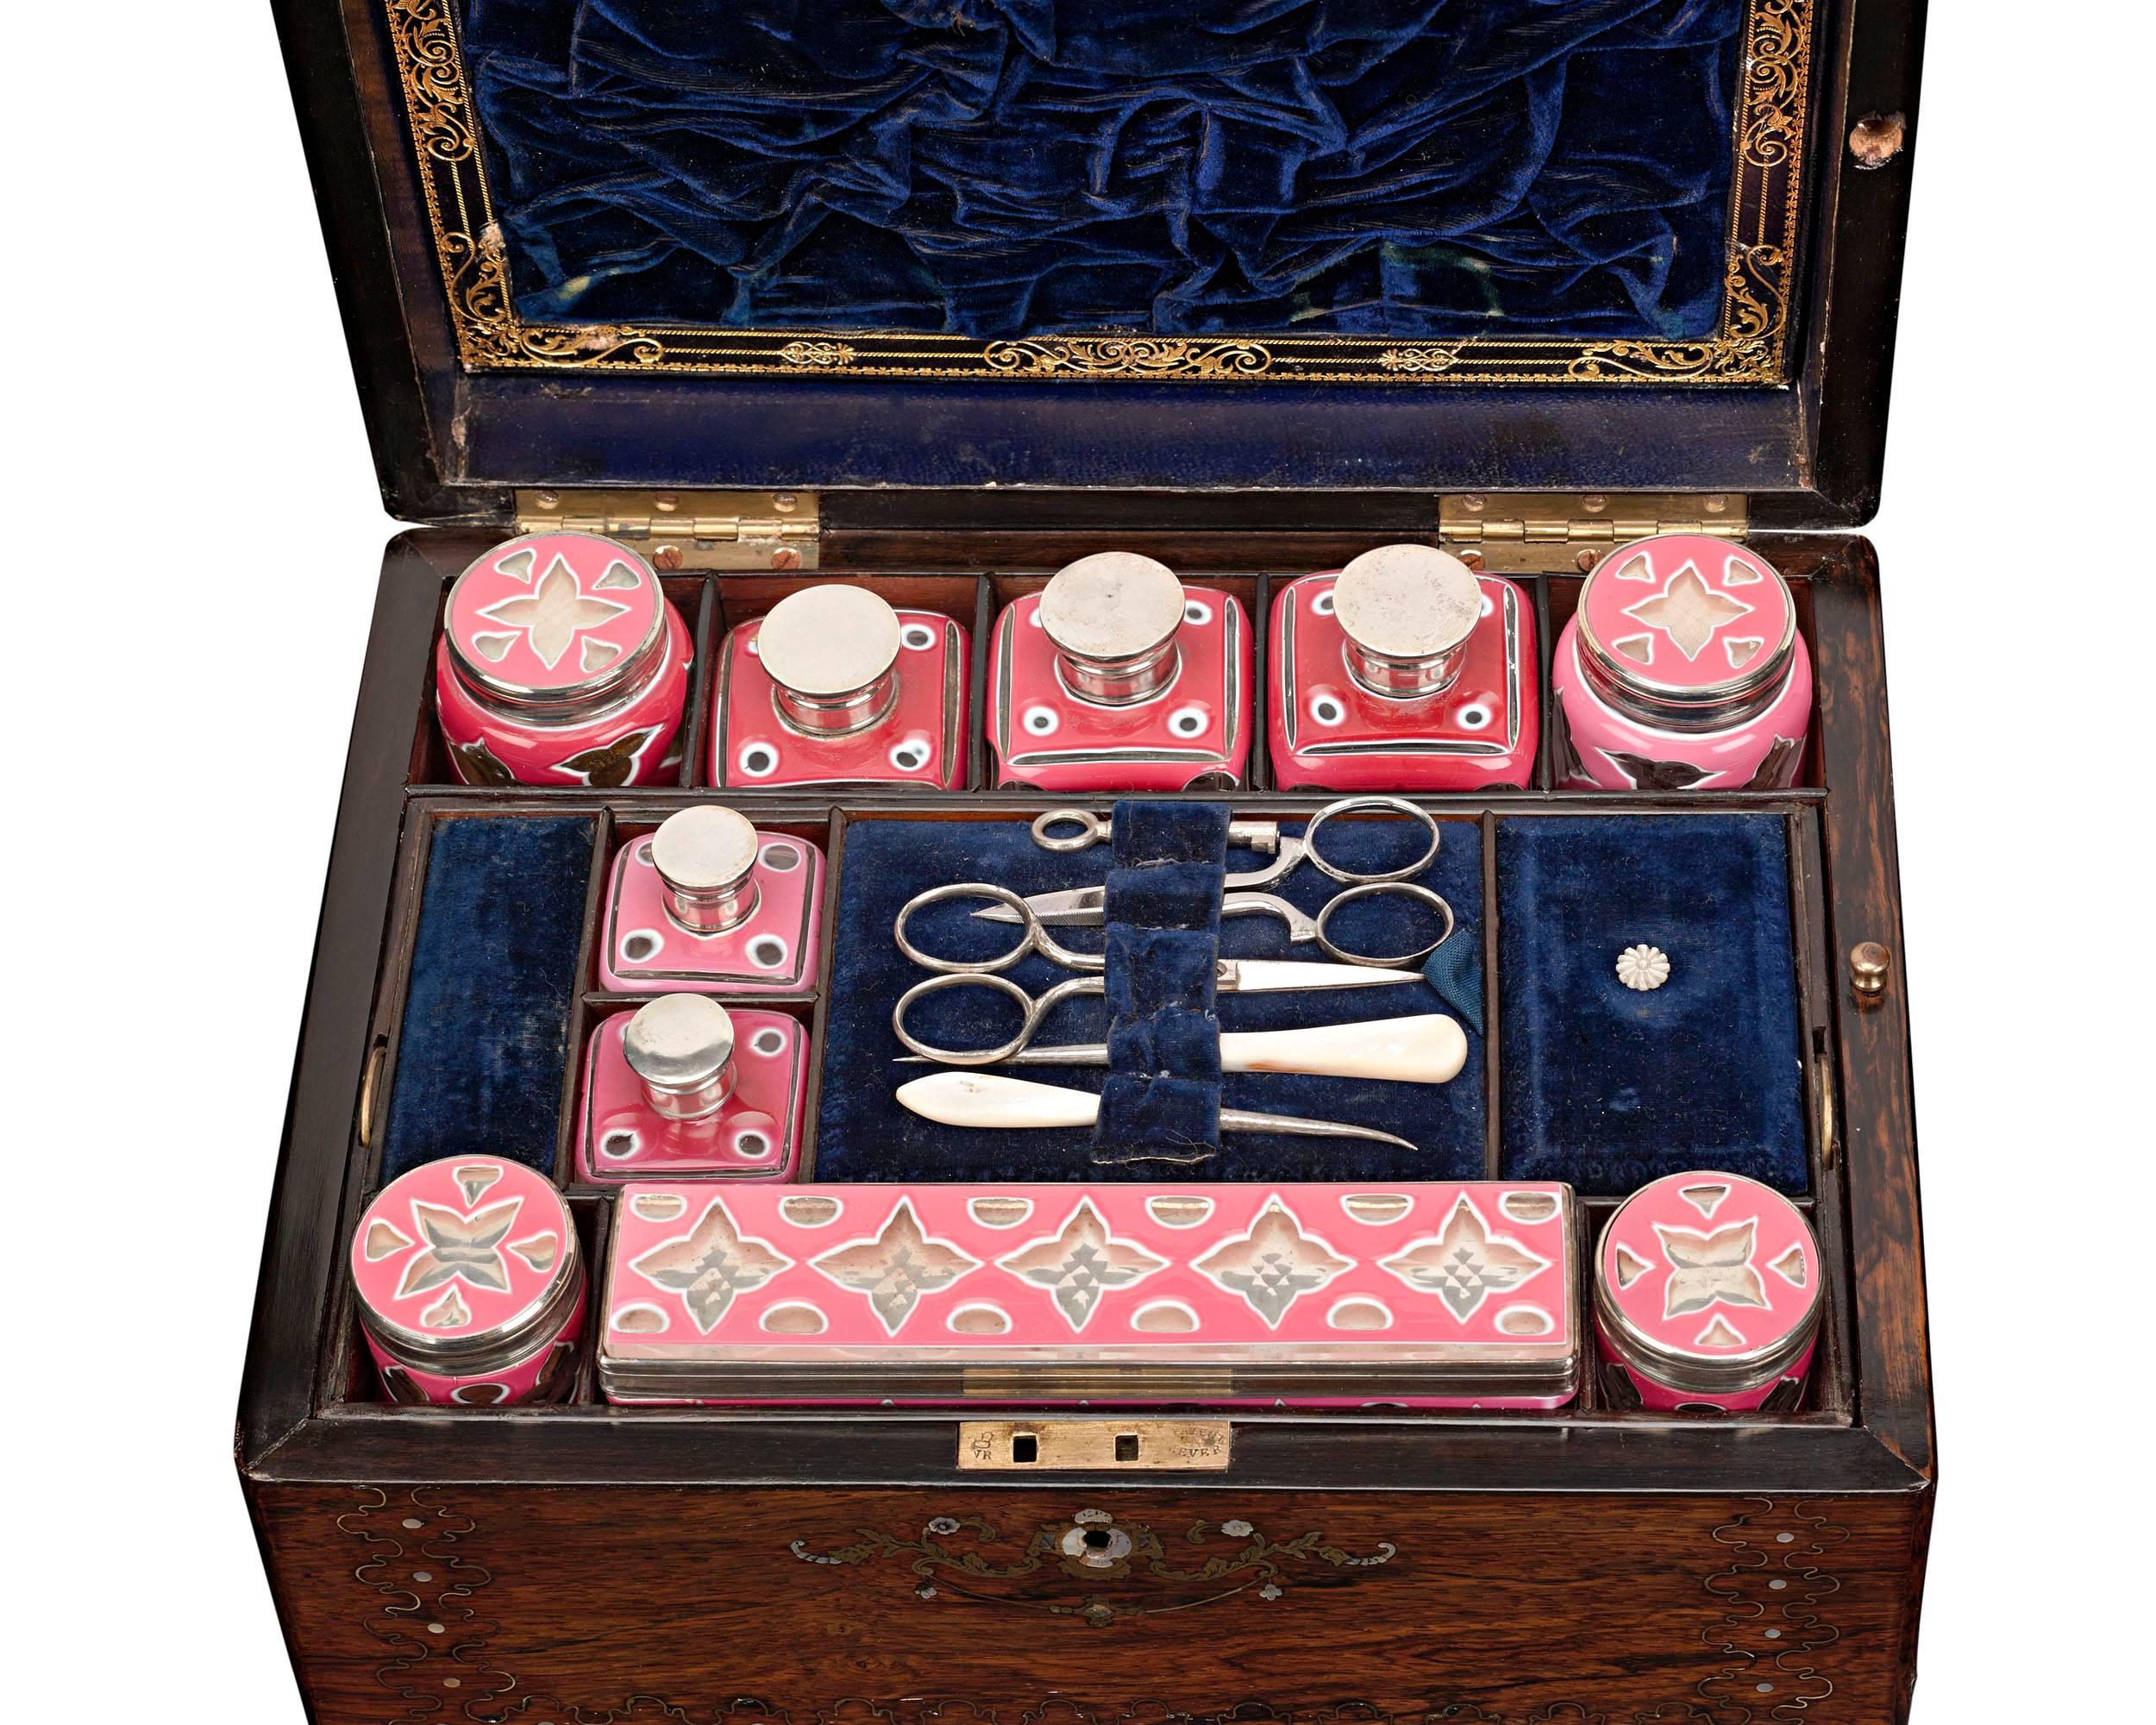 A work of extraordinary craftsmanship, this exquisite English vanity case is as much an item of luxury as it is of necessity. Known as a nécessaire de voyage, the case features a luxurious blue velvet-lined interior that houses various toiletry